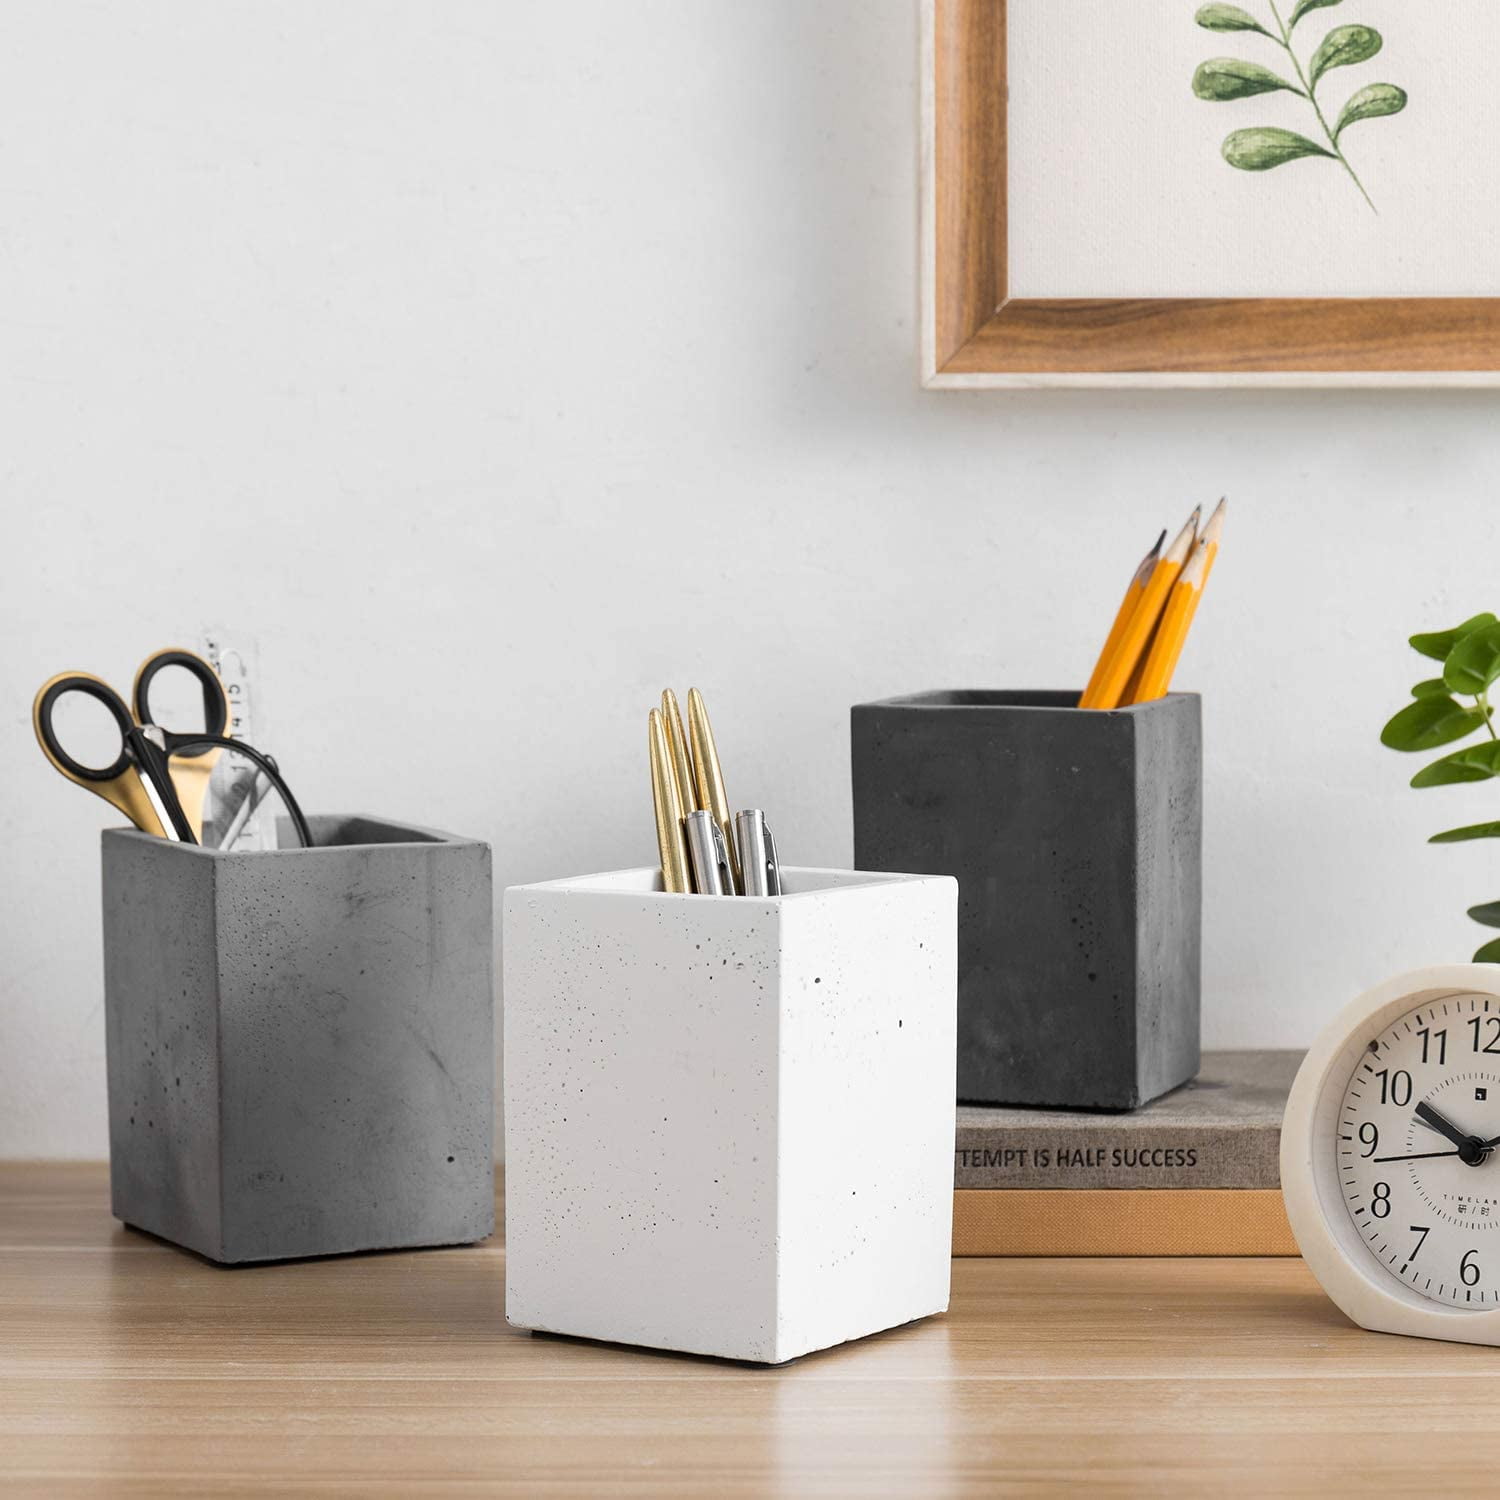 MyGift Modern Gray Concrete Cylinder Desktop Pen Holder Pencil Cup and Office Stationery Supplies Storage Organizer Holder in Monochrome Colors, Set